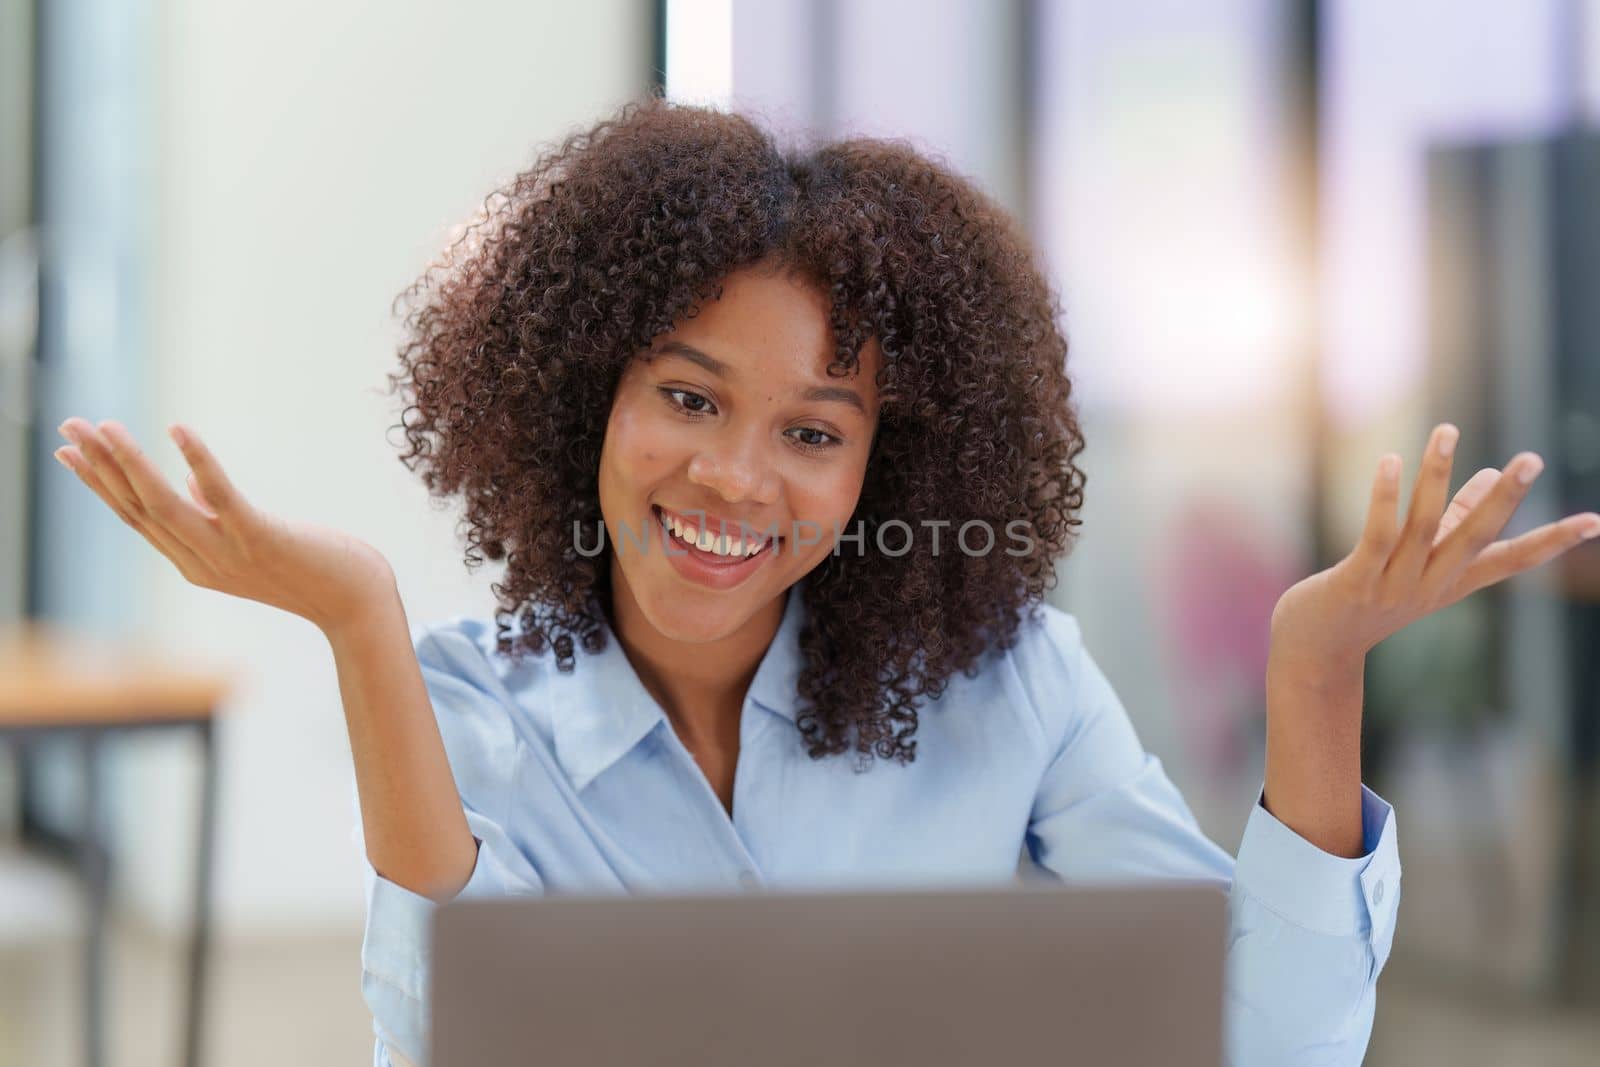 Attractive black businesswoman using laptop video conference call, business colleagues. Communicating with team.